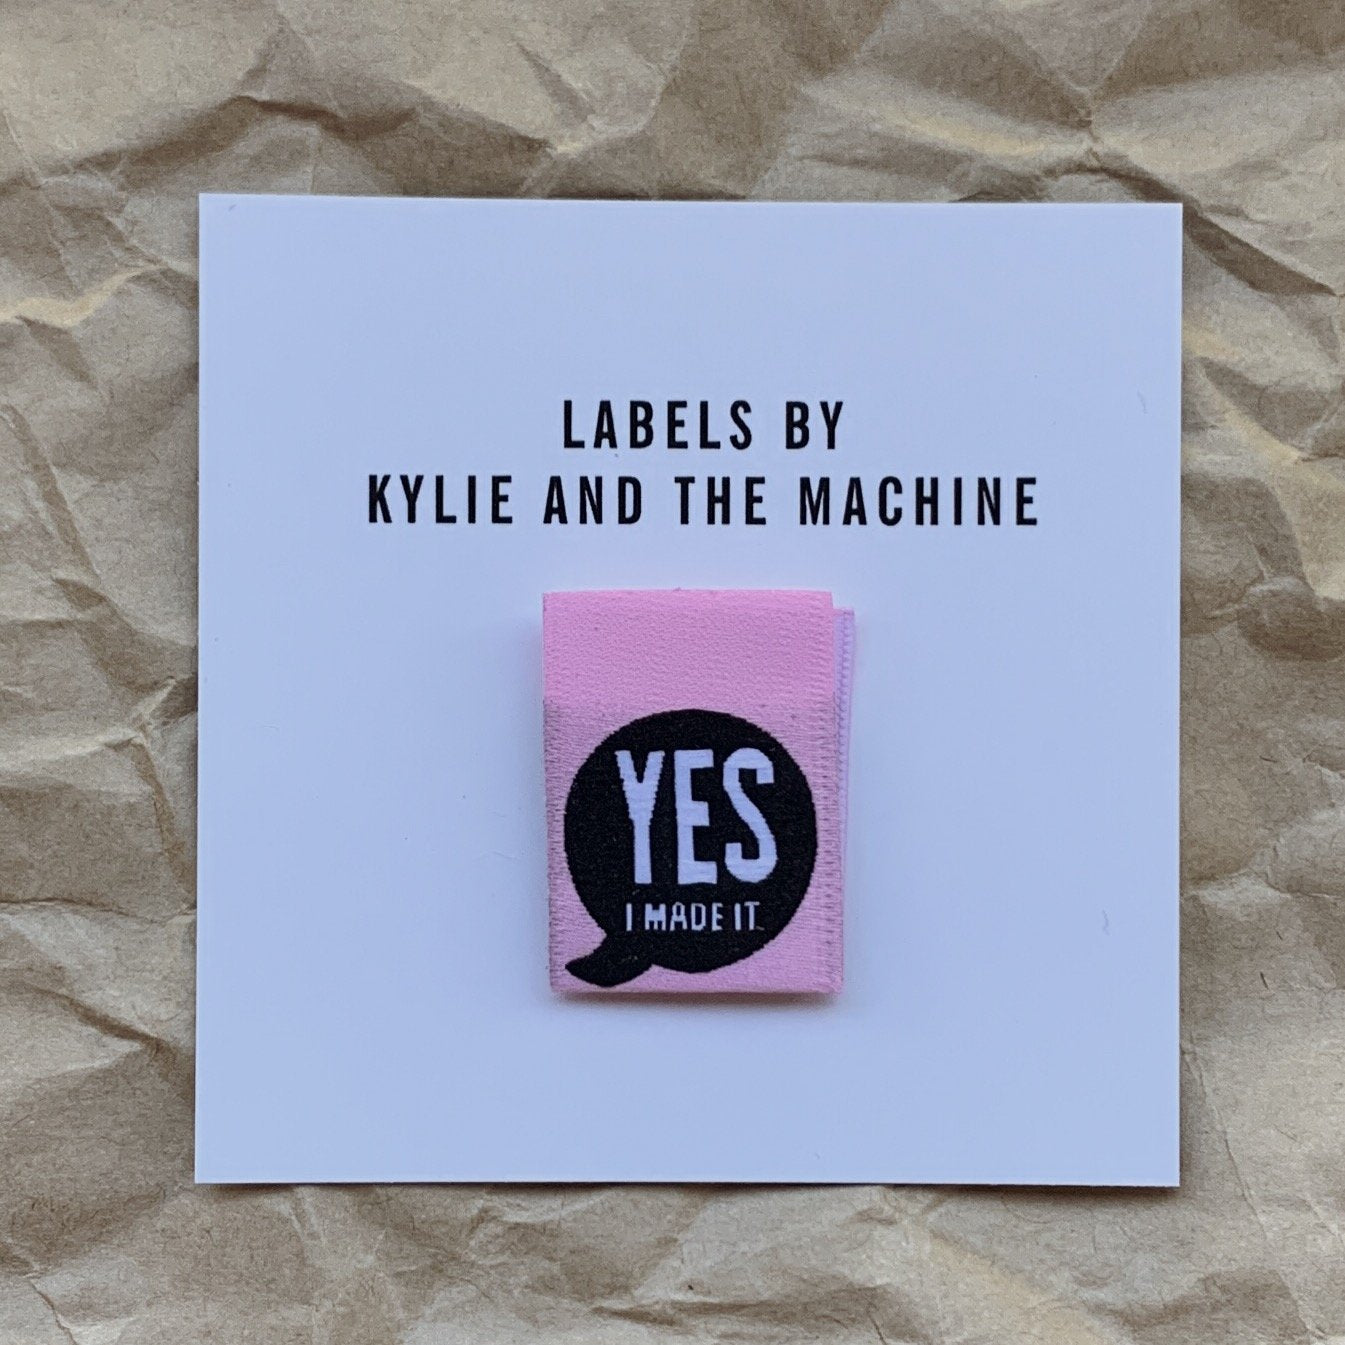 Kylie and the Machine - "YES I MADE IT" Pack of 8 Woven Labels